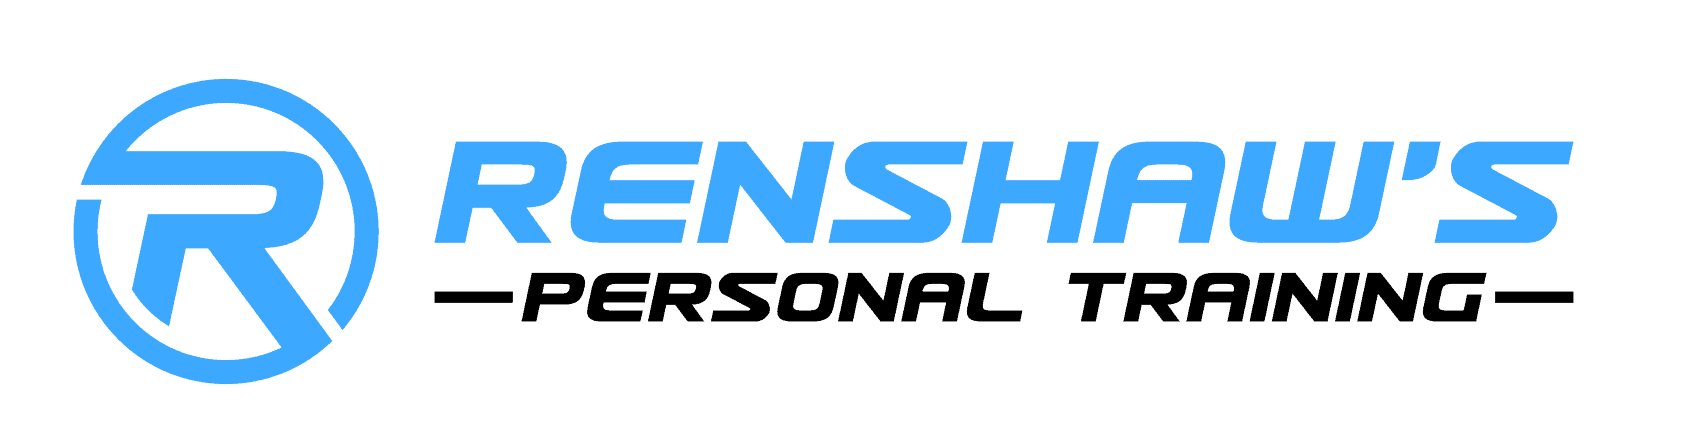 RENSHAW-S PERSONAL TRAINING SOLID BLUE